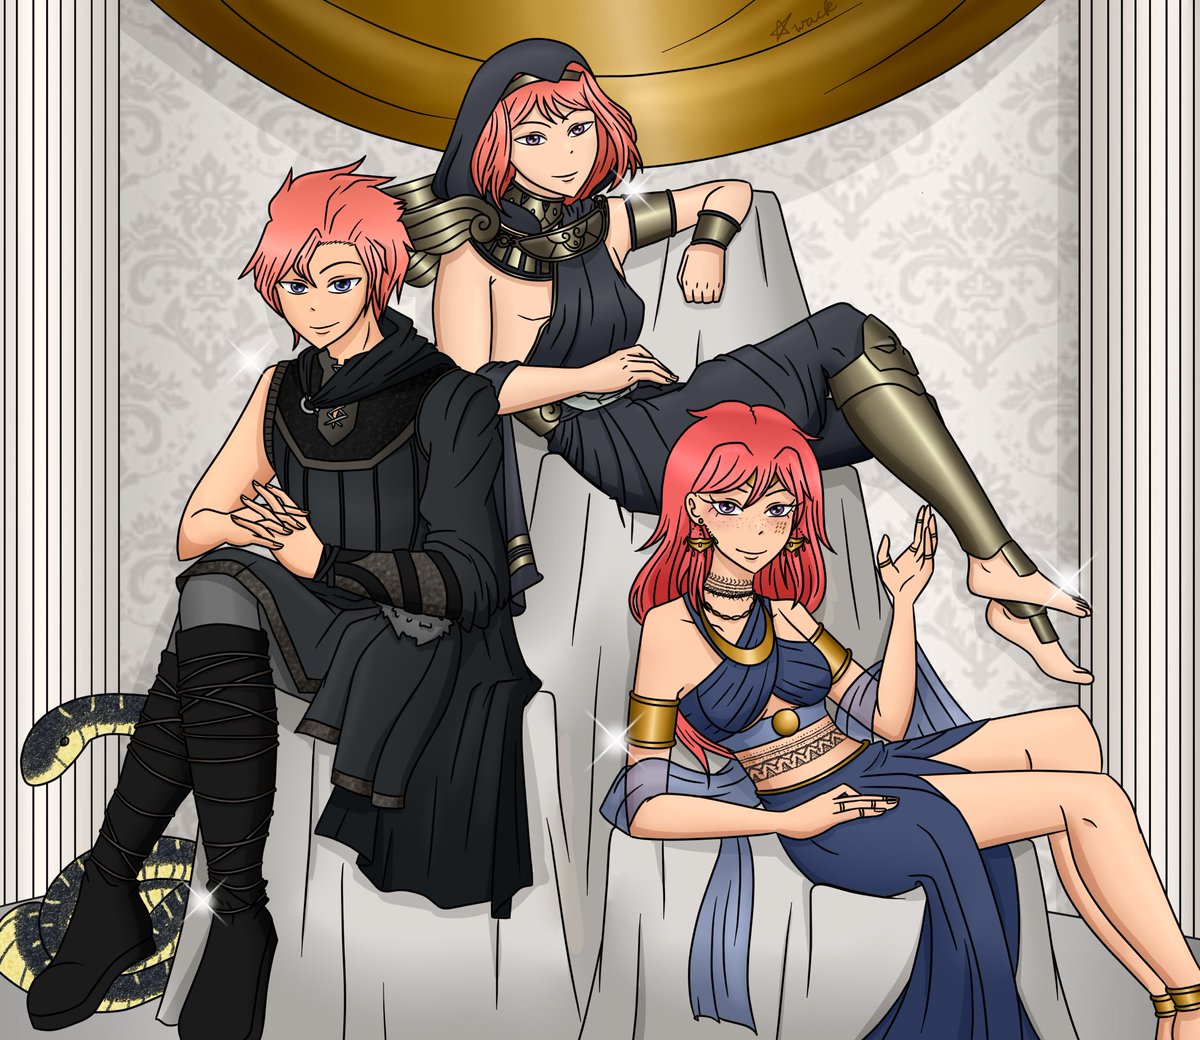 Me and my siblings are on our way to the party! Here’s our outfits

#BirthdayBallPV

((Zach: Thanatos 
Cody:nuadah
Sarah: anitun tabu))